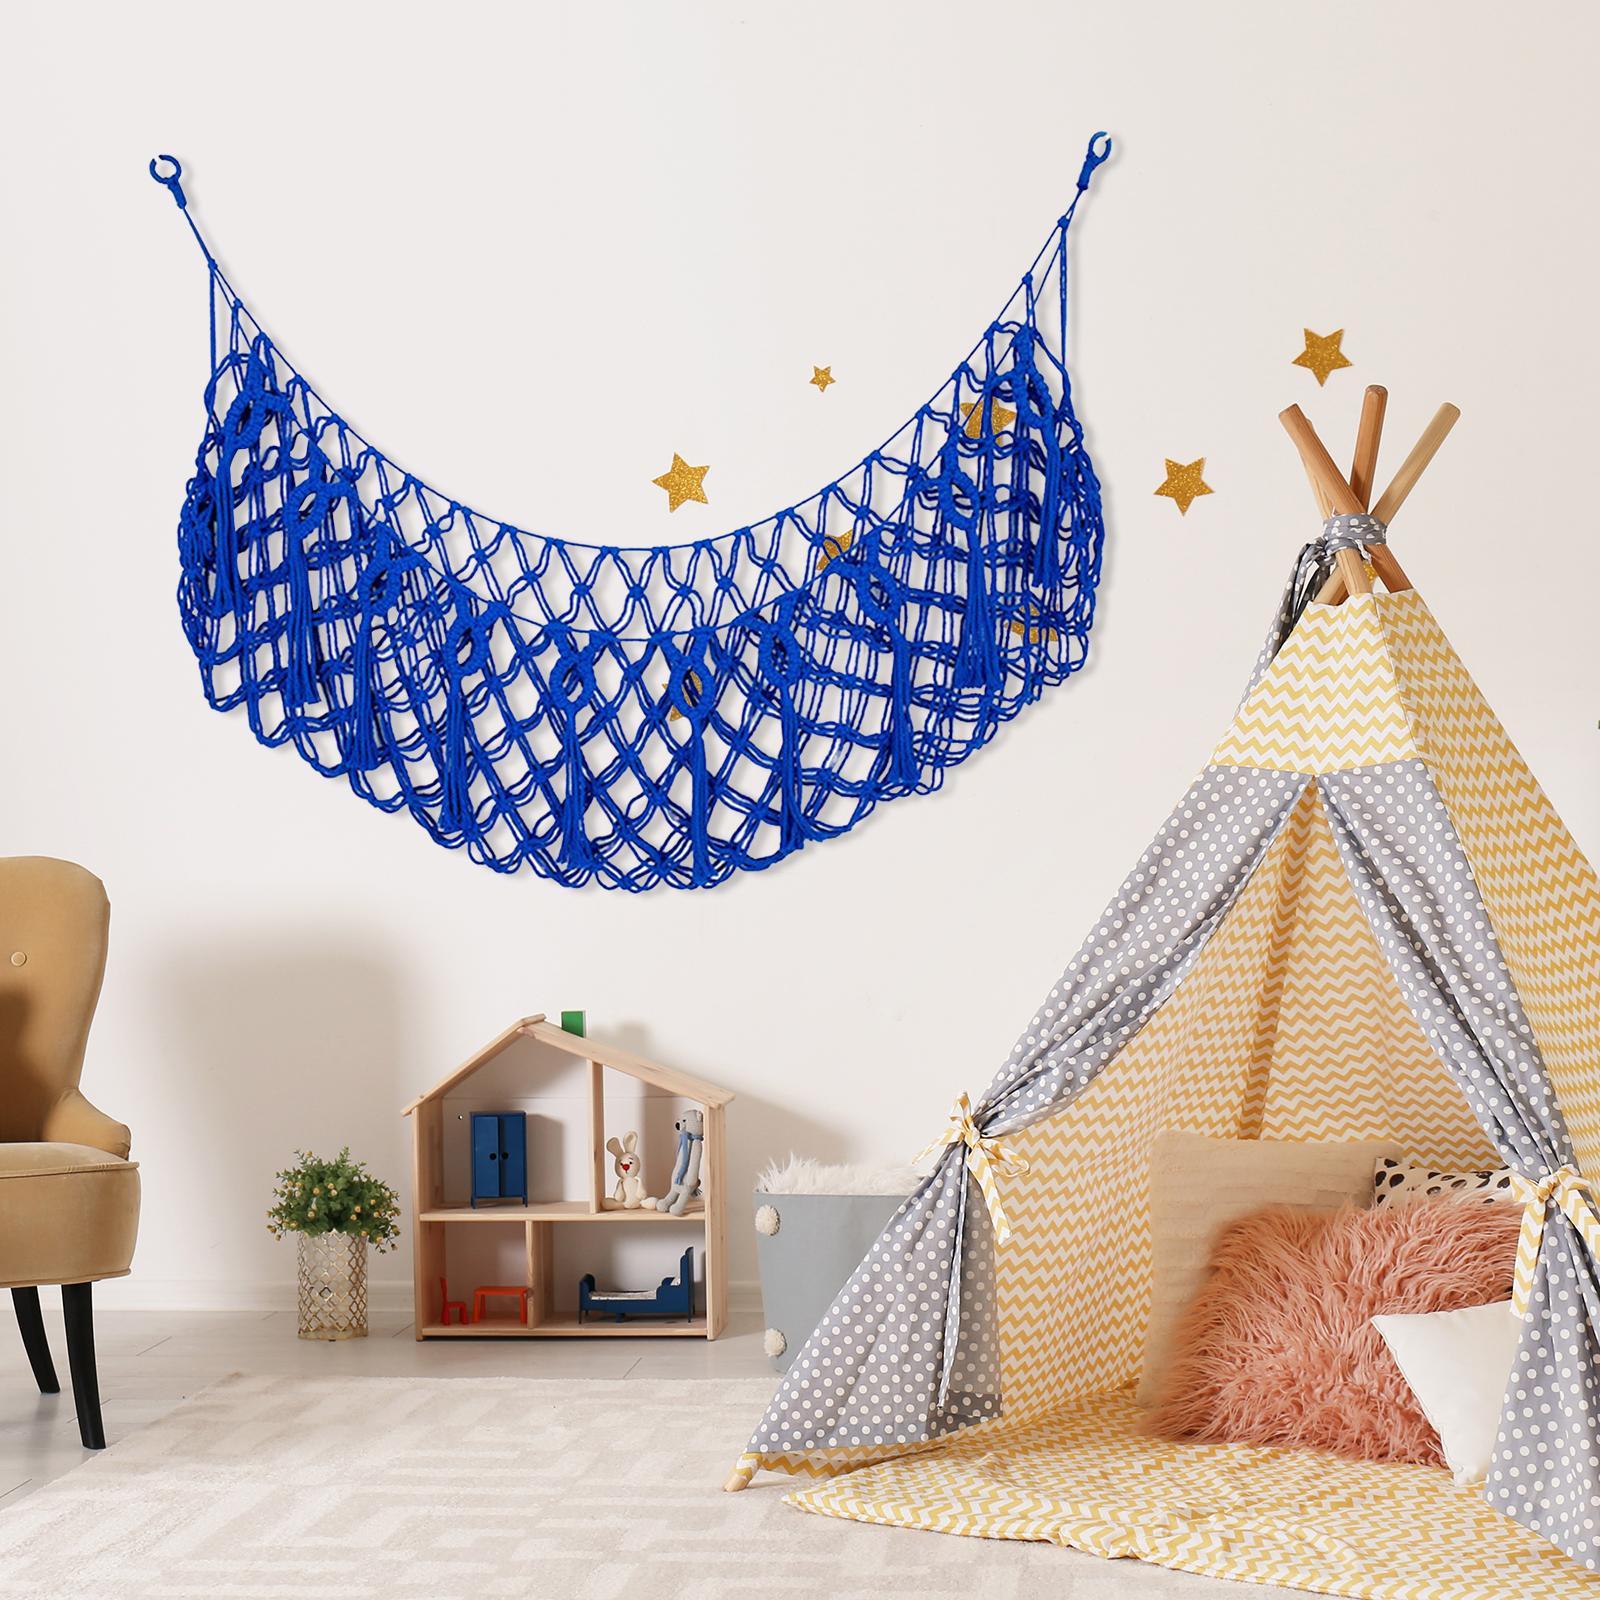 Soft Toy Net Hammock Woven Rope Home Decor Handmade Hanging Net for Playroom Blue